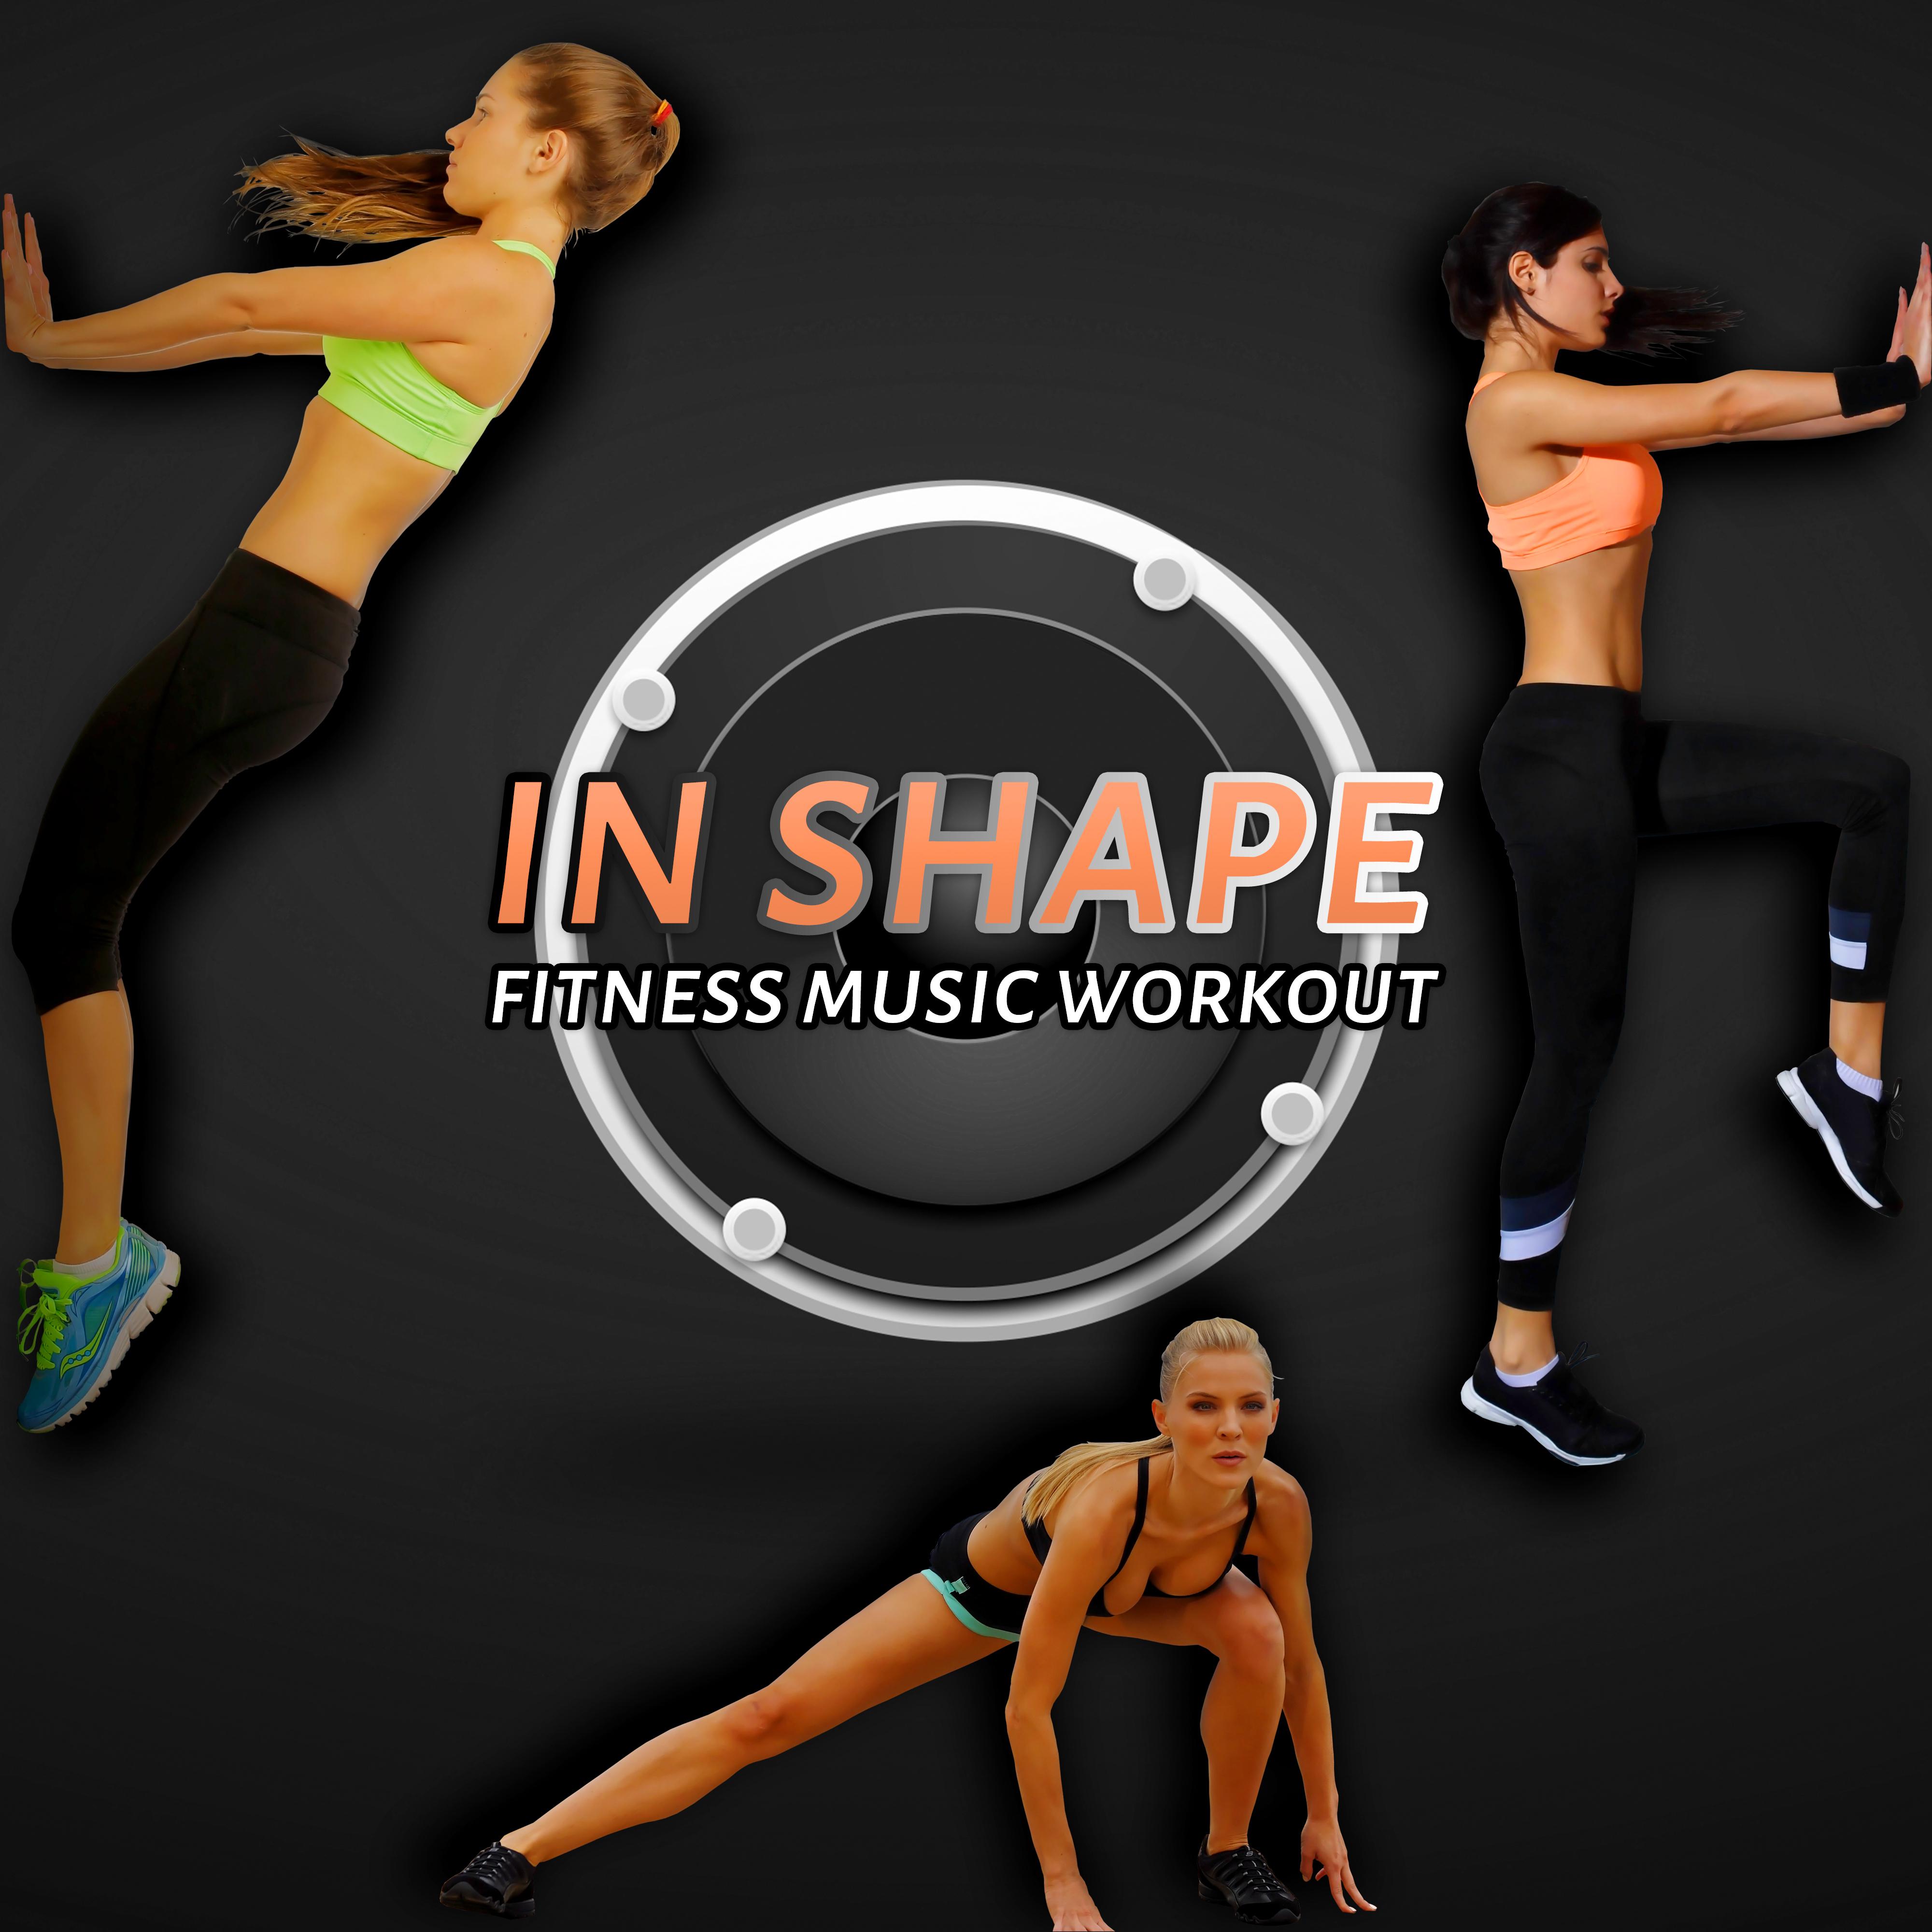 In Shape - Fitness Music Workout, Aerobic, Running, Cardio, Weight Lifting